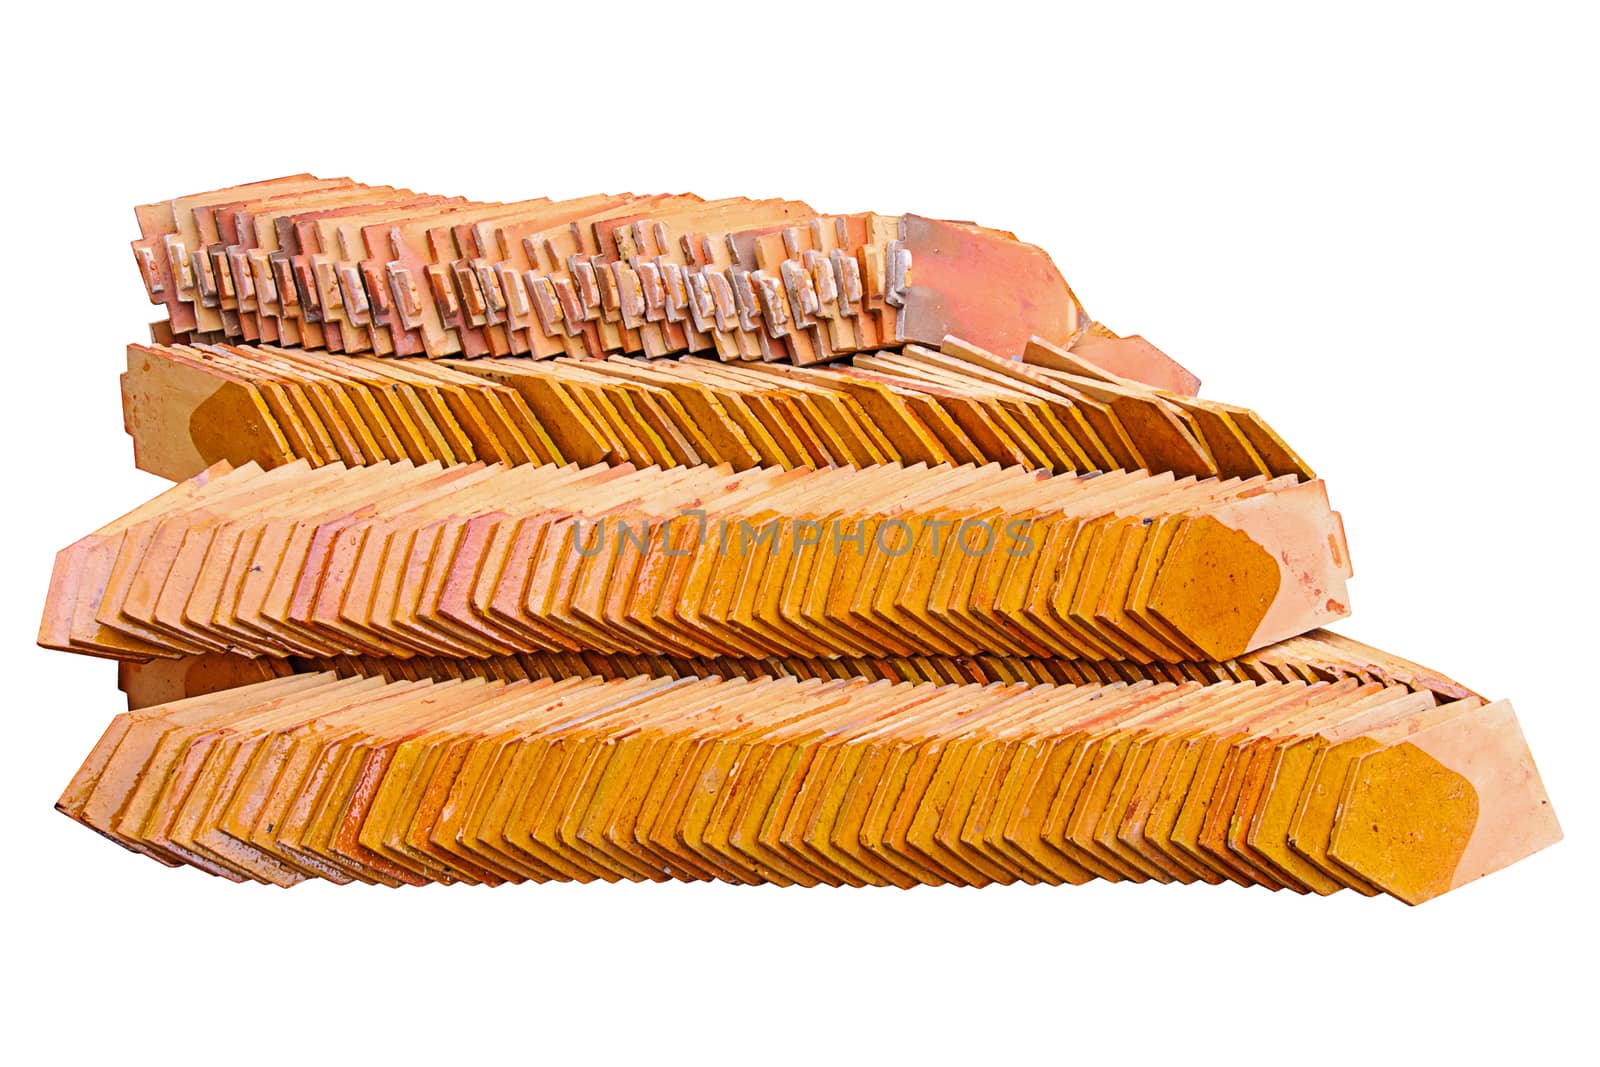 Pile of roofing tiles isolated on white with clipping path